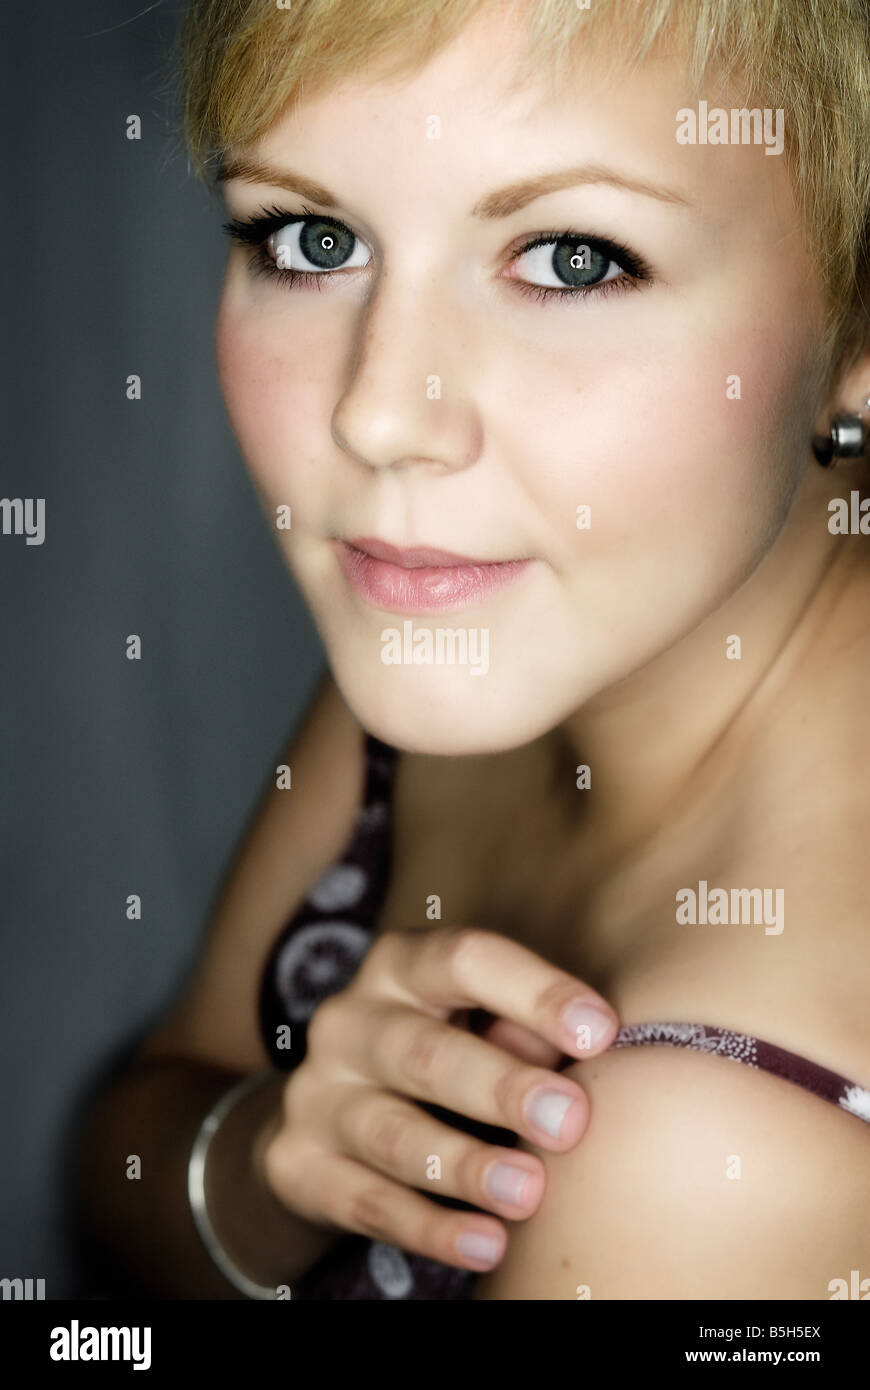 portrait of a young woman with blond short hair wearing a tank top Stock Photo